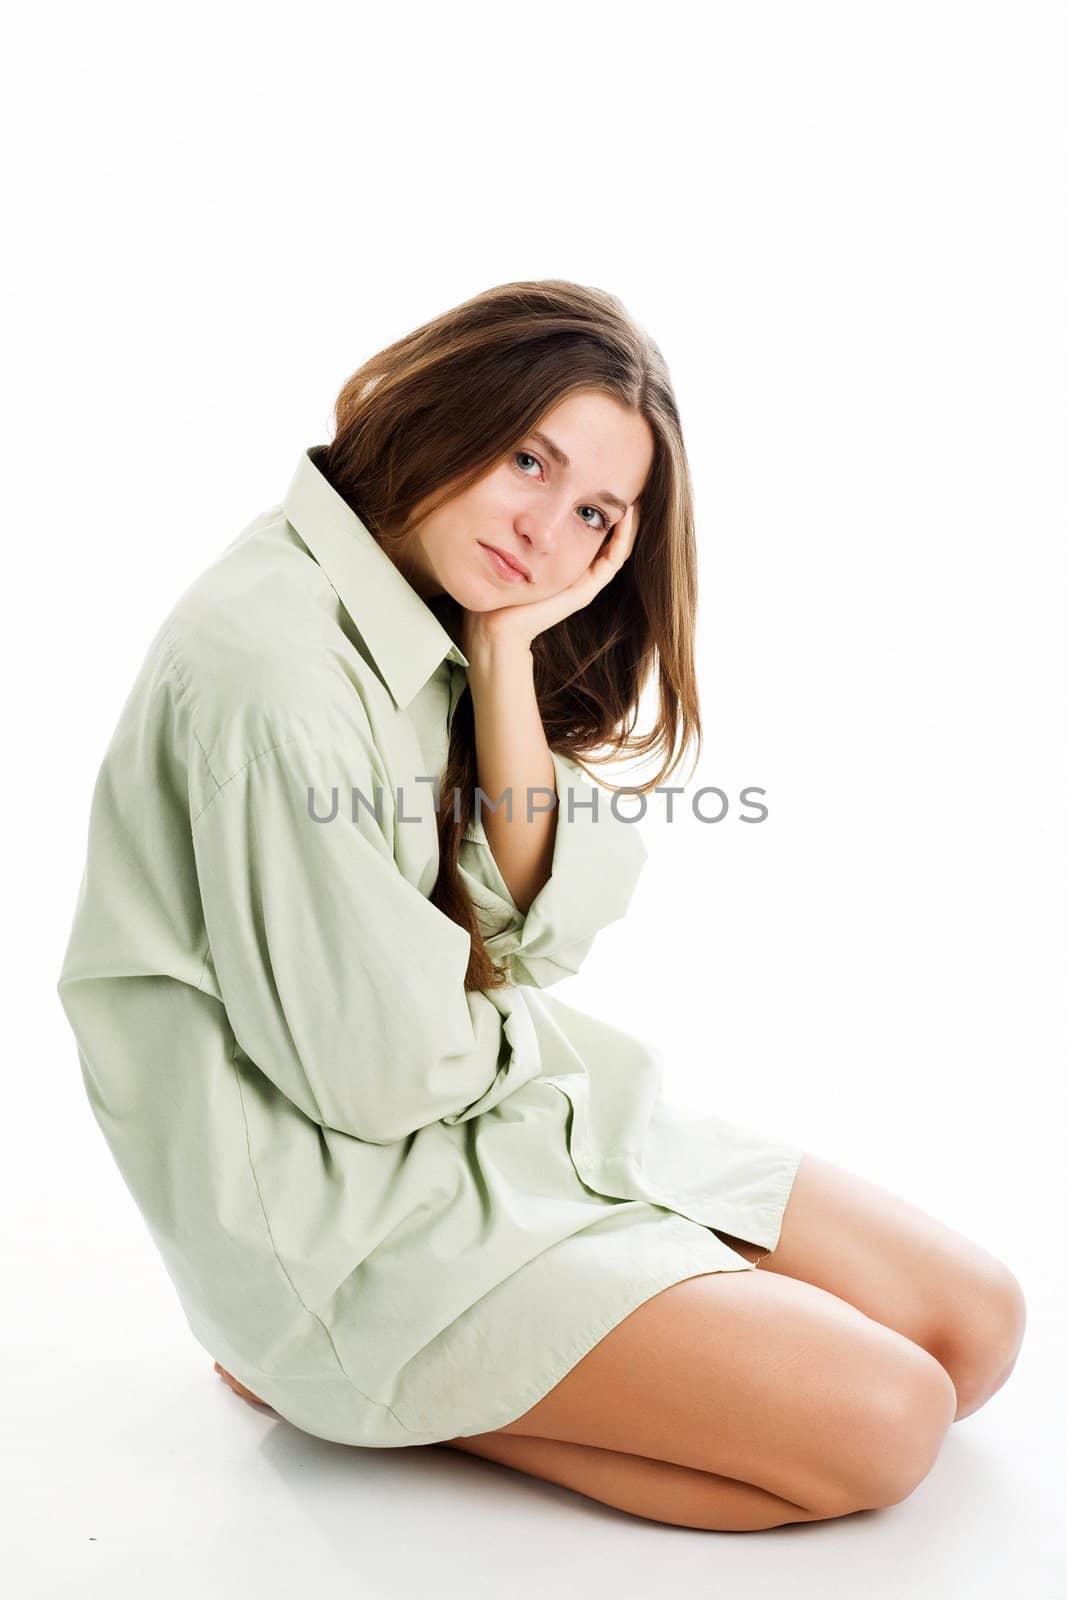 An image of a nice girl sitting on the floor